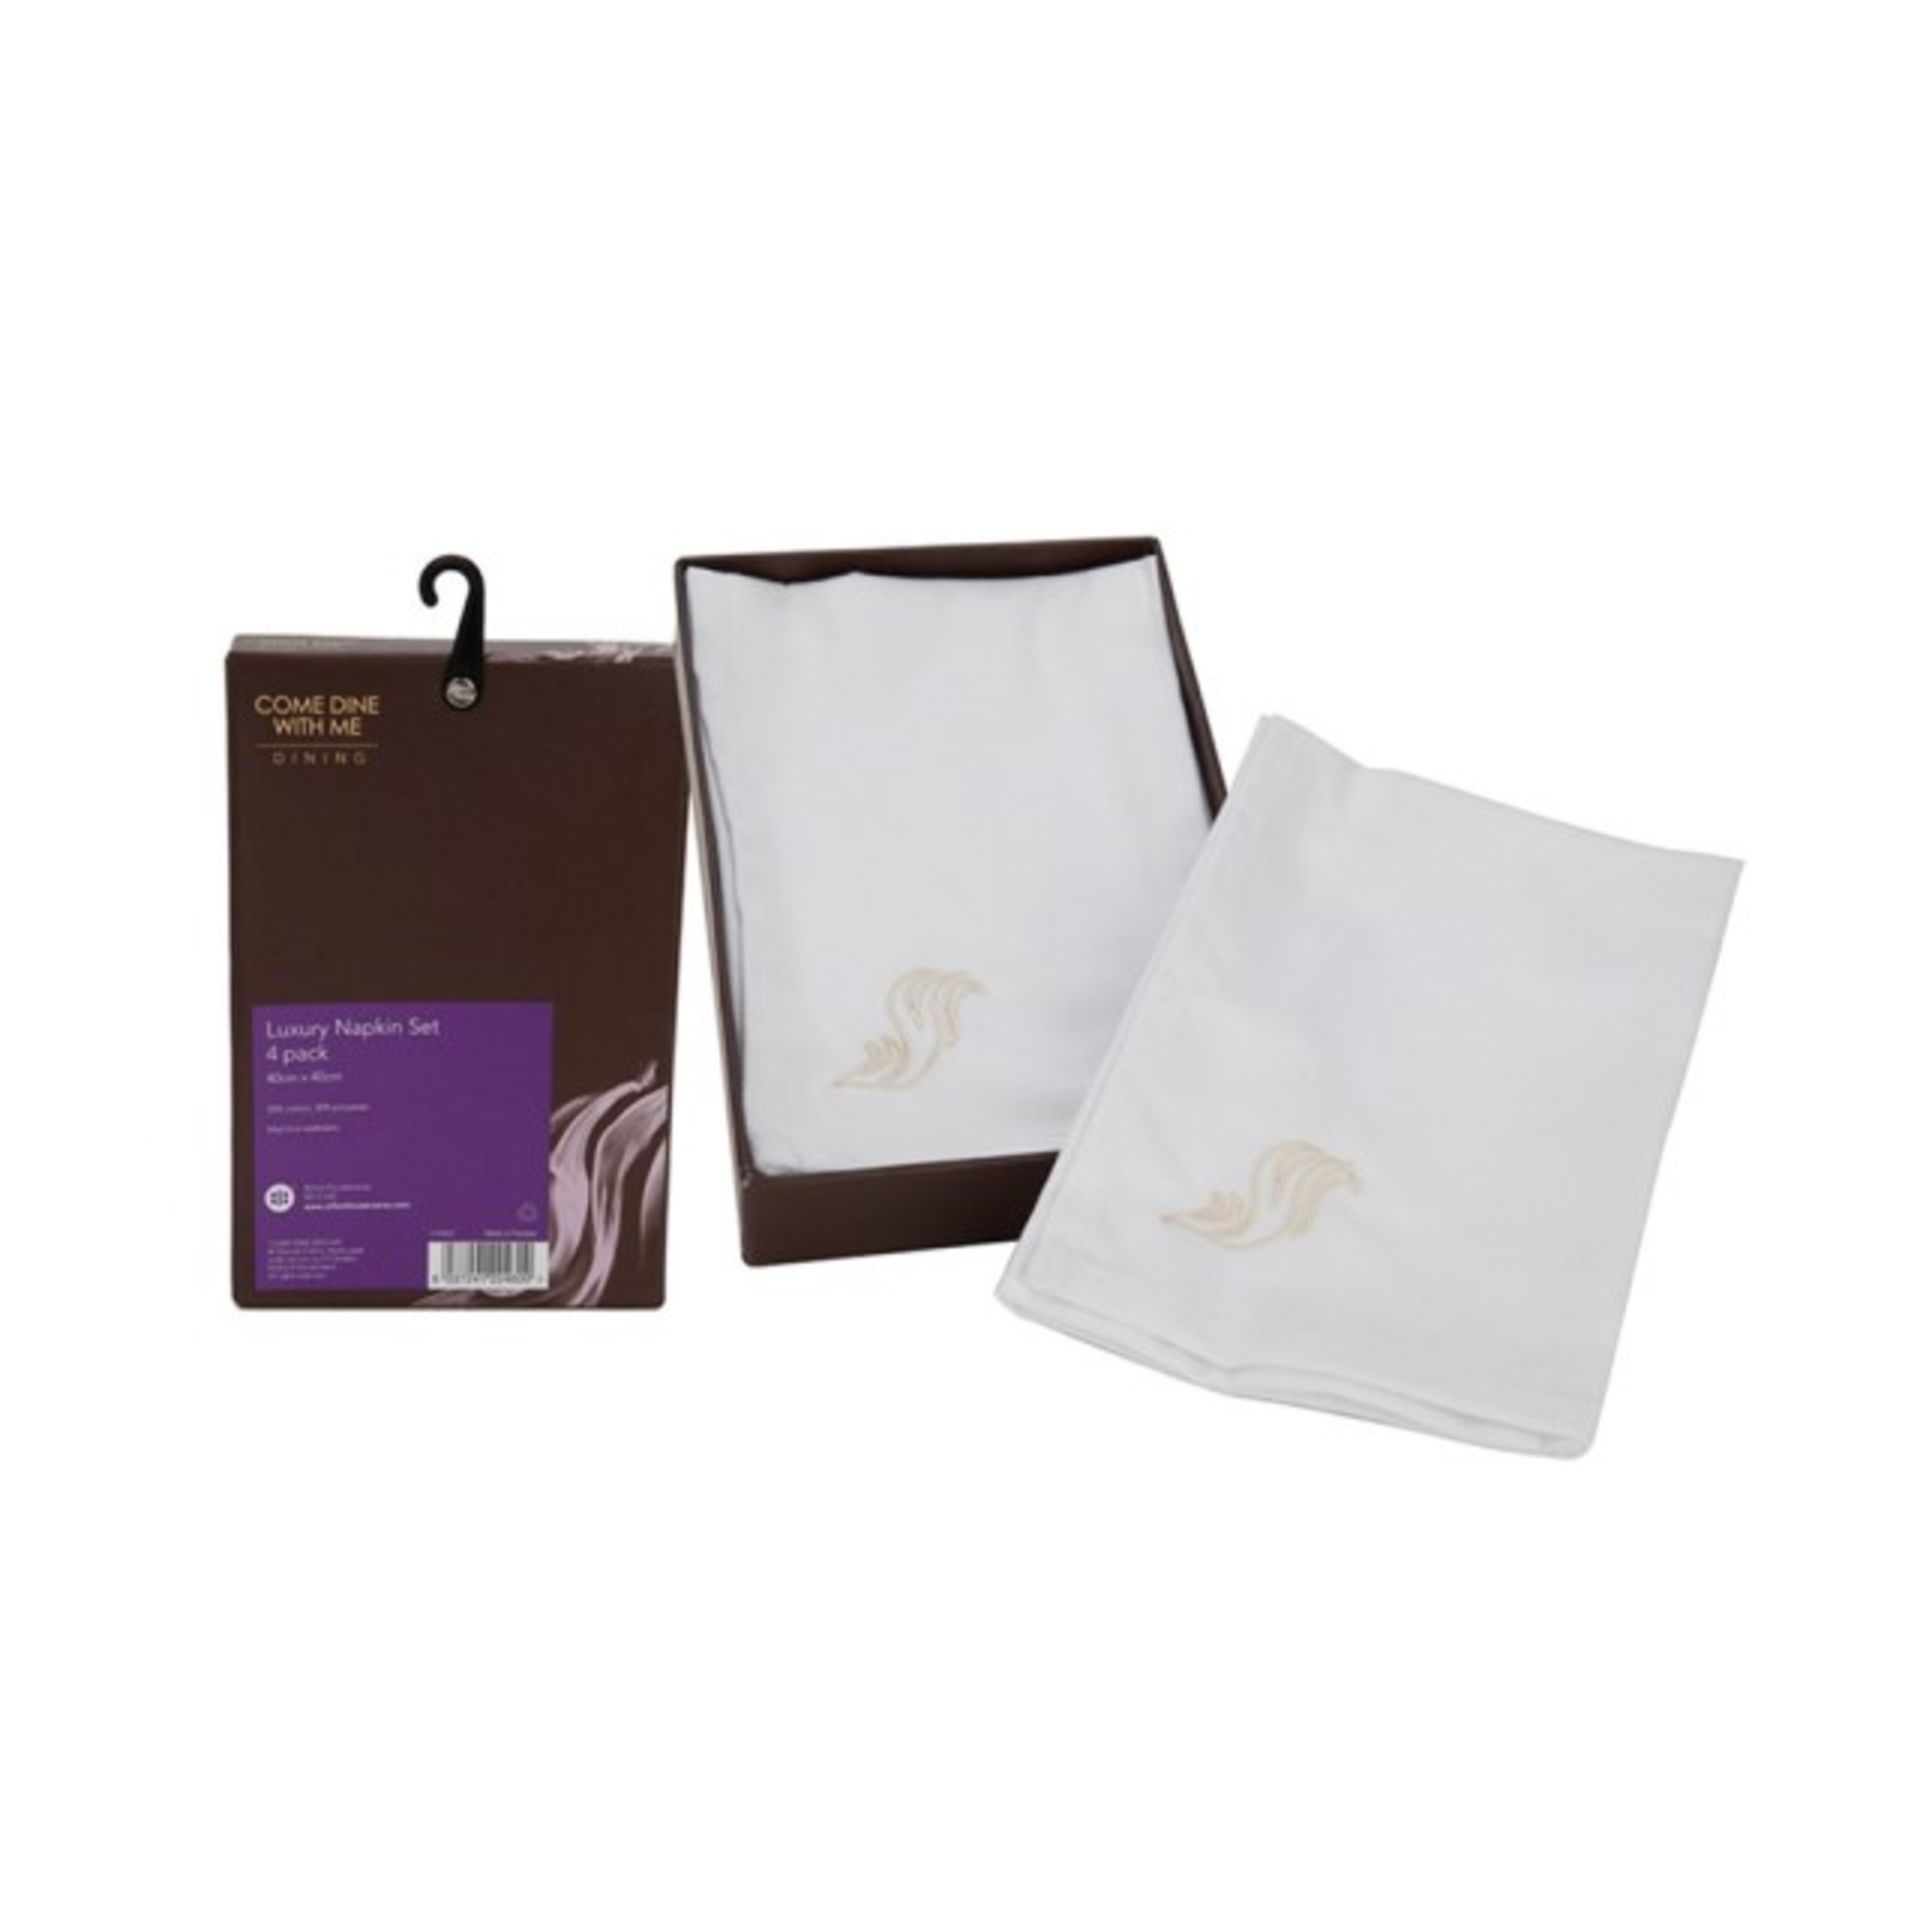 V *TRADE QTY* Grade A Come Dine With Me Luxury Napkin Set 4Pack X 10 YOUR BID PRICE TO BE MULTIPLIED